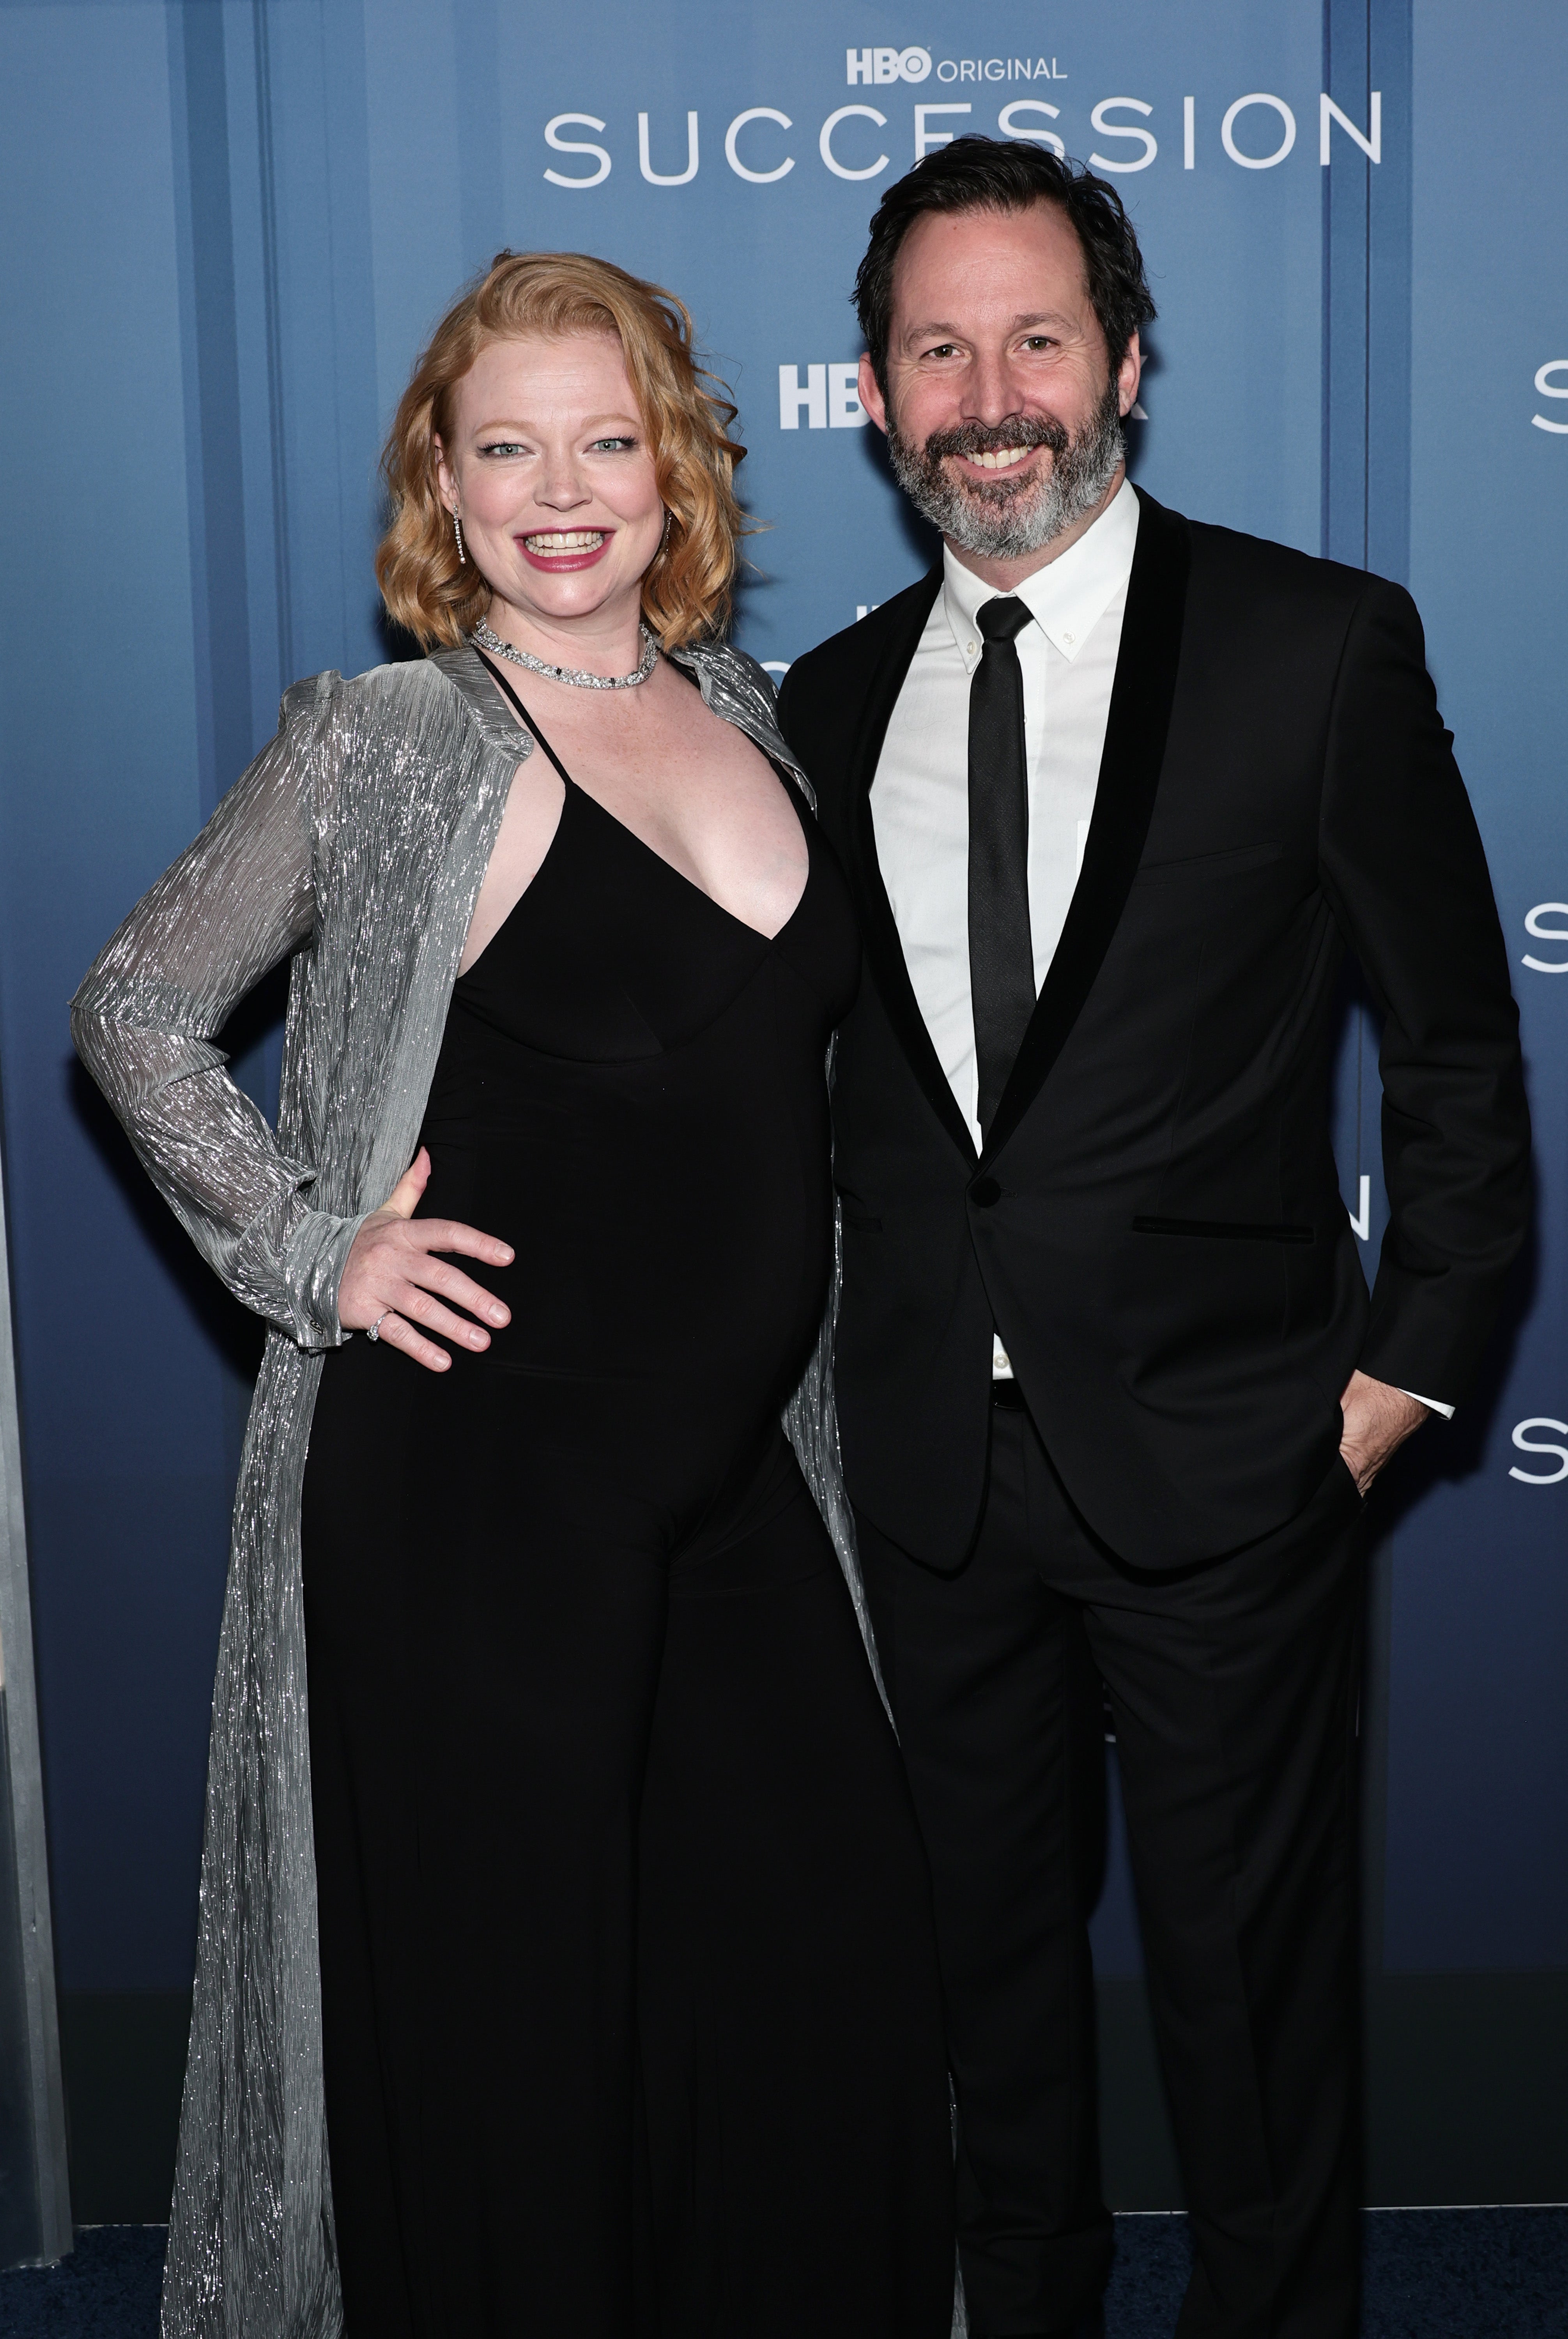 Sarah Snook and Dave Lawson attend the HBO's "Succession" Season 4 Premiere at Jazz at Lincoln Center on March 20, 2023